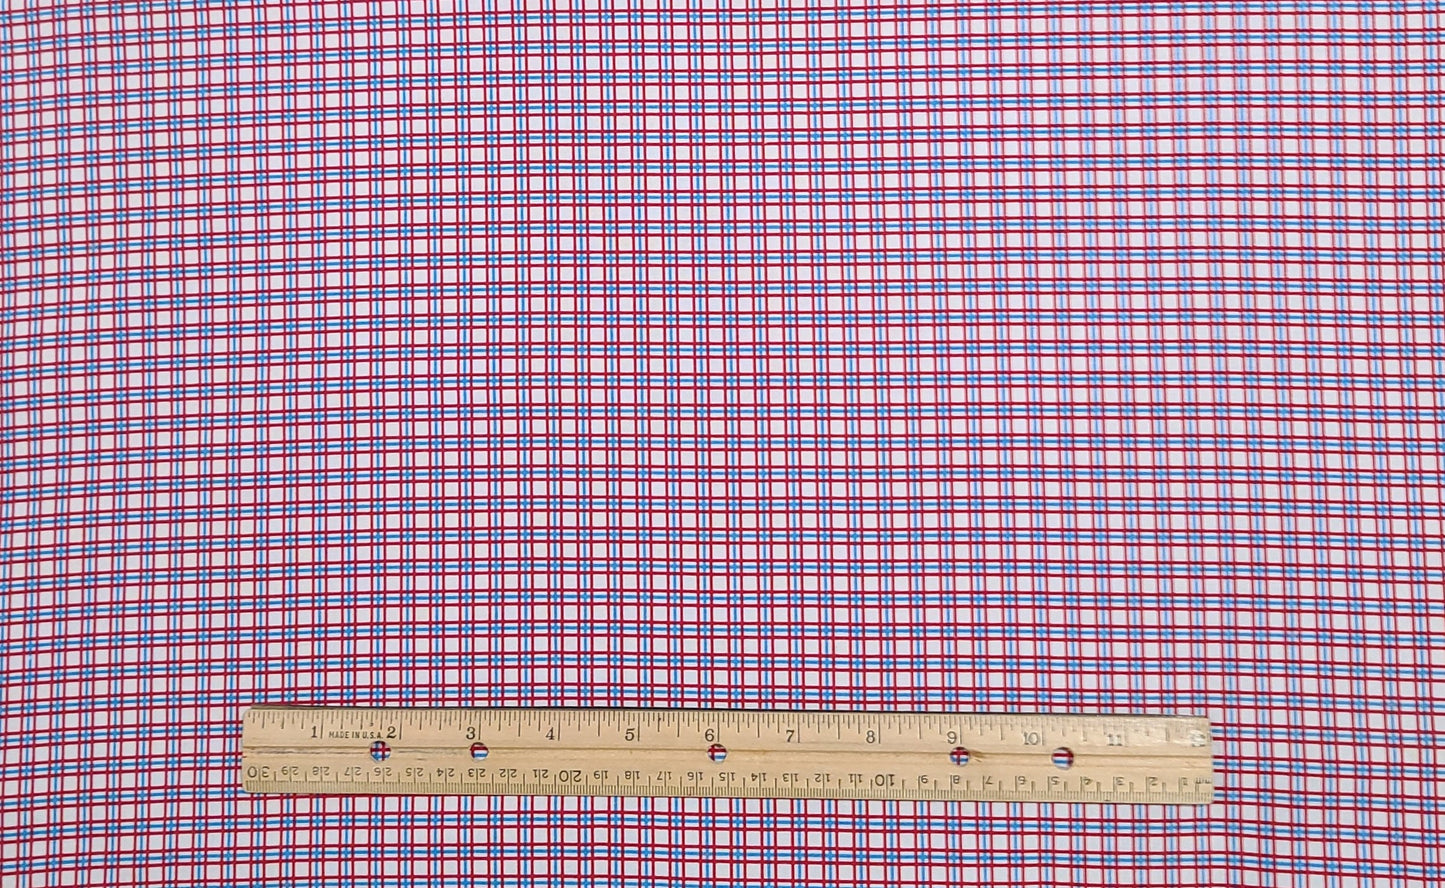 Daisy Kingdom for Quilters ONLY #4504 "Raggedy Ann Mini Plaid" Simon & Schuster Inc-White Fabric / Red, Light Blue Windowpane Plaid Pattern